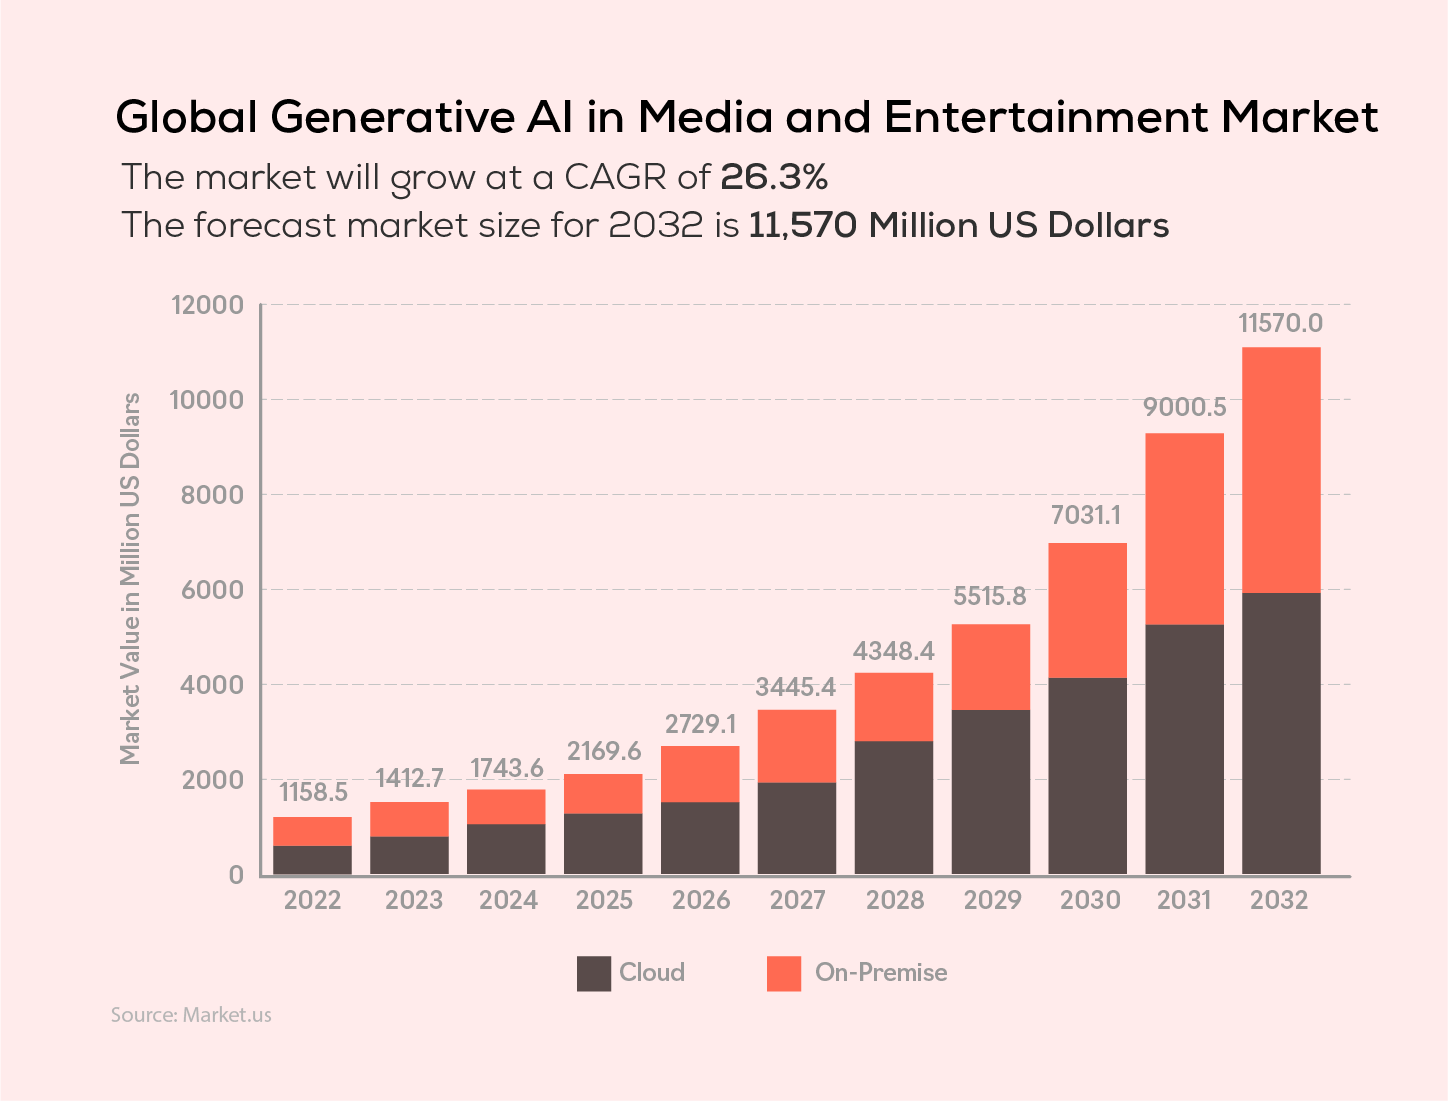 Global Generative AI in Media and Entertainment Market